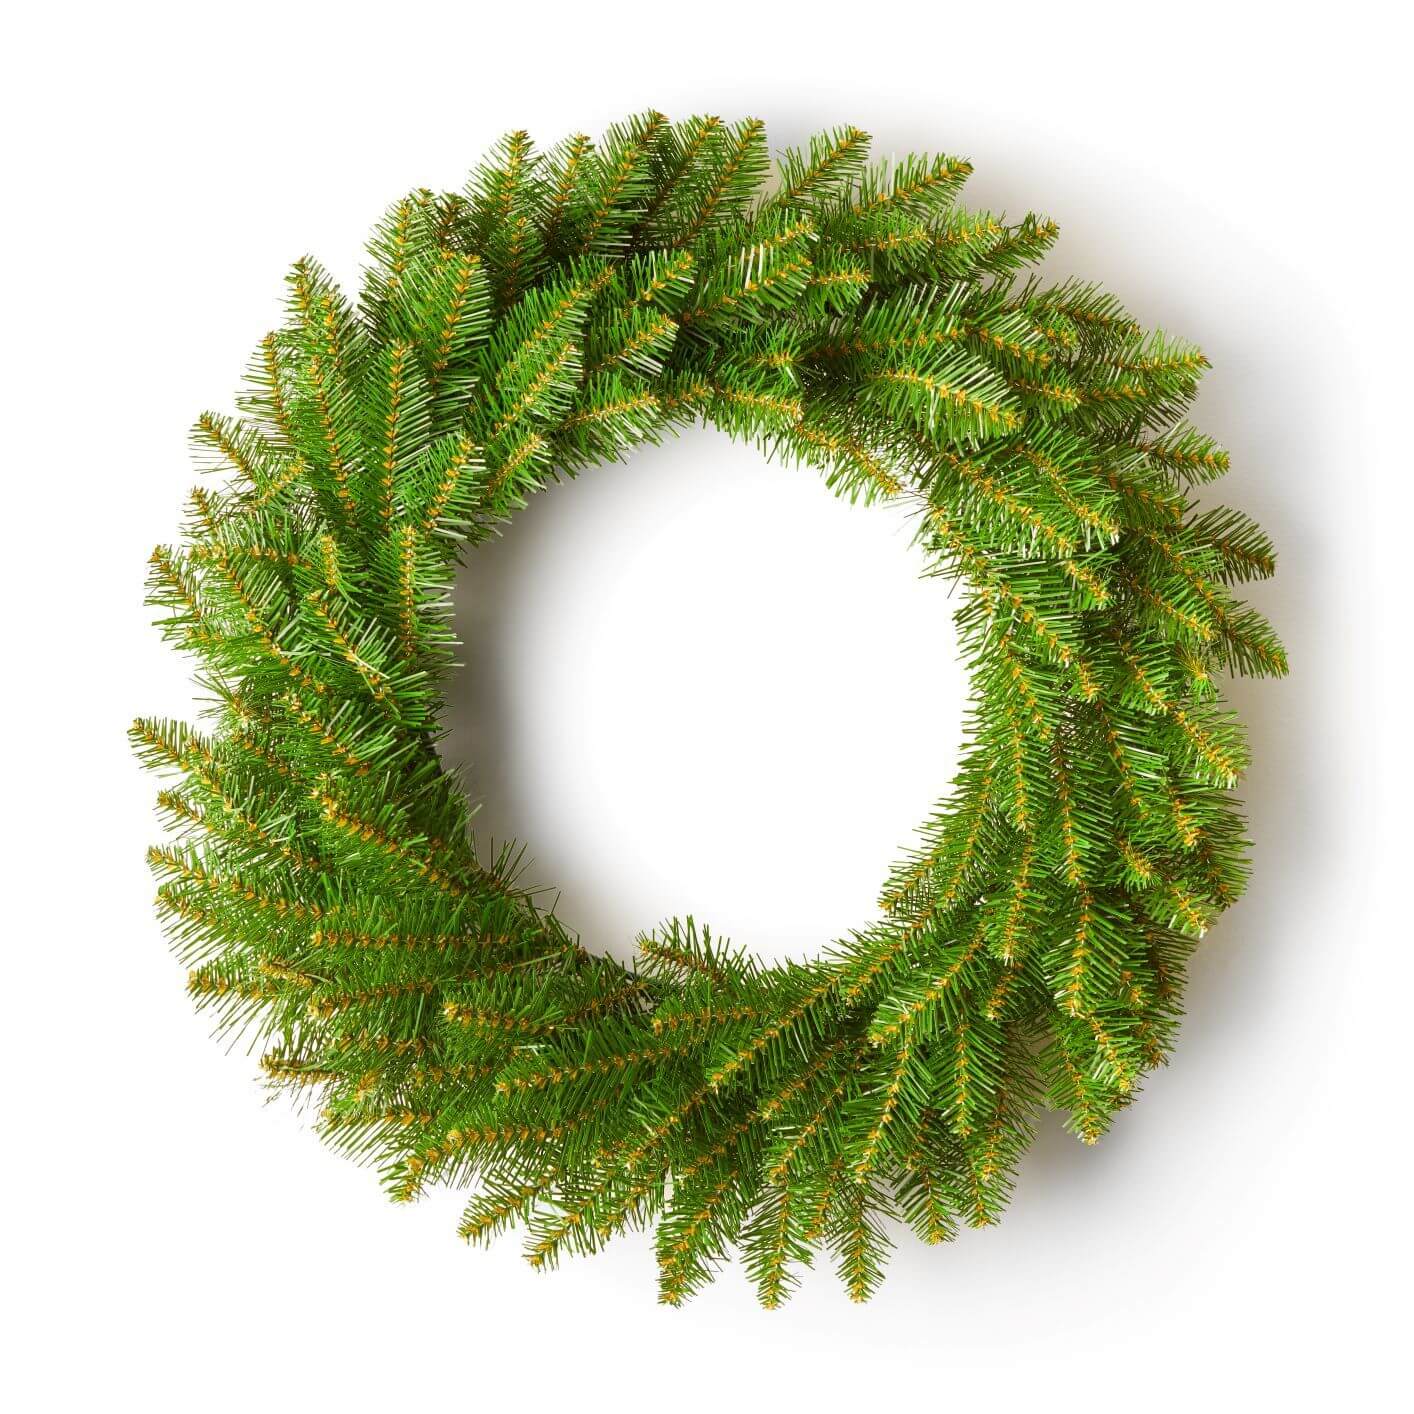 King of Christmas 24" Yorkshire Fir Wreath with Warm White LED Lights (Battery Operated)